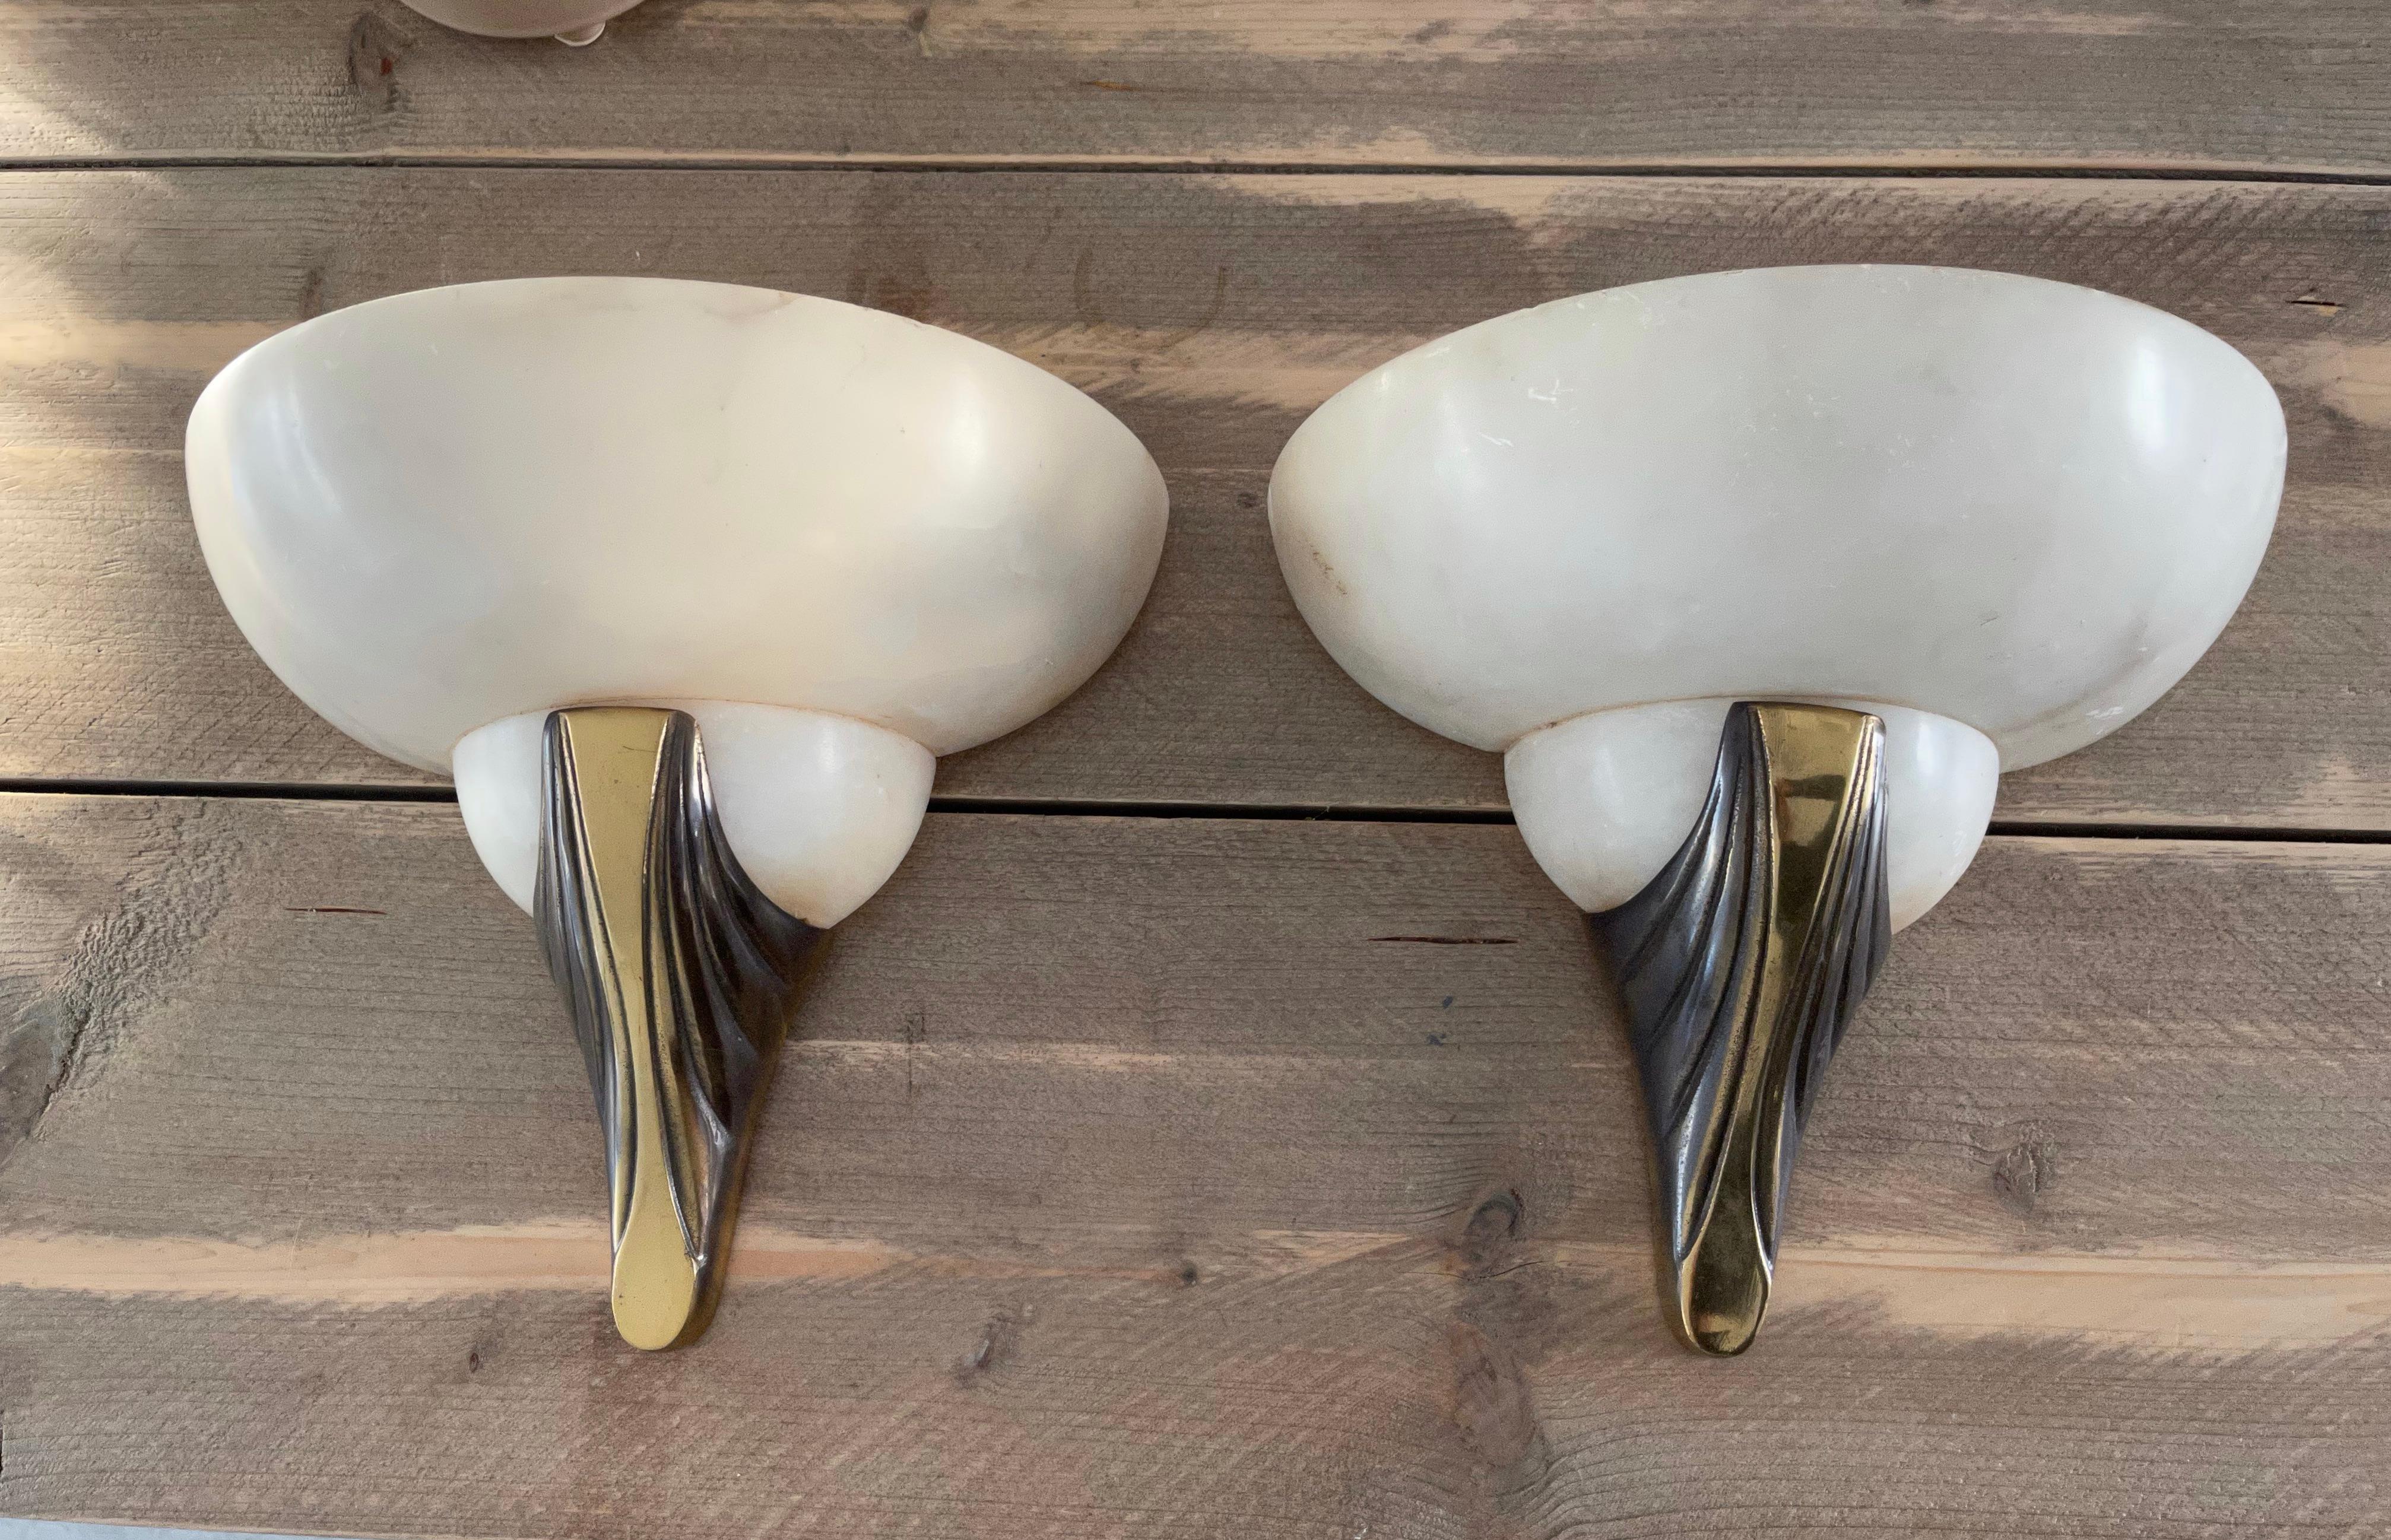 Pair of Handmade French Art Deco Style Alabaster & Bronze Sconces / Wall Lights For Sale 4